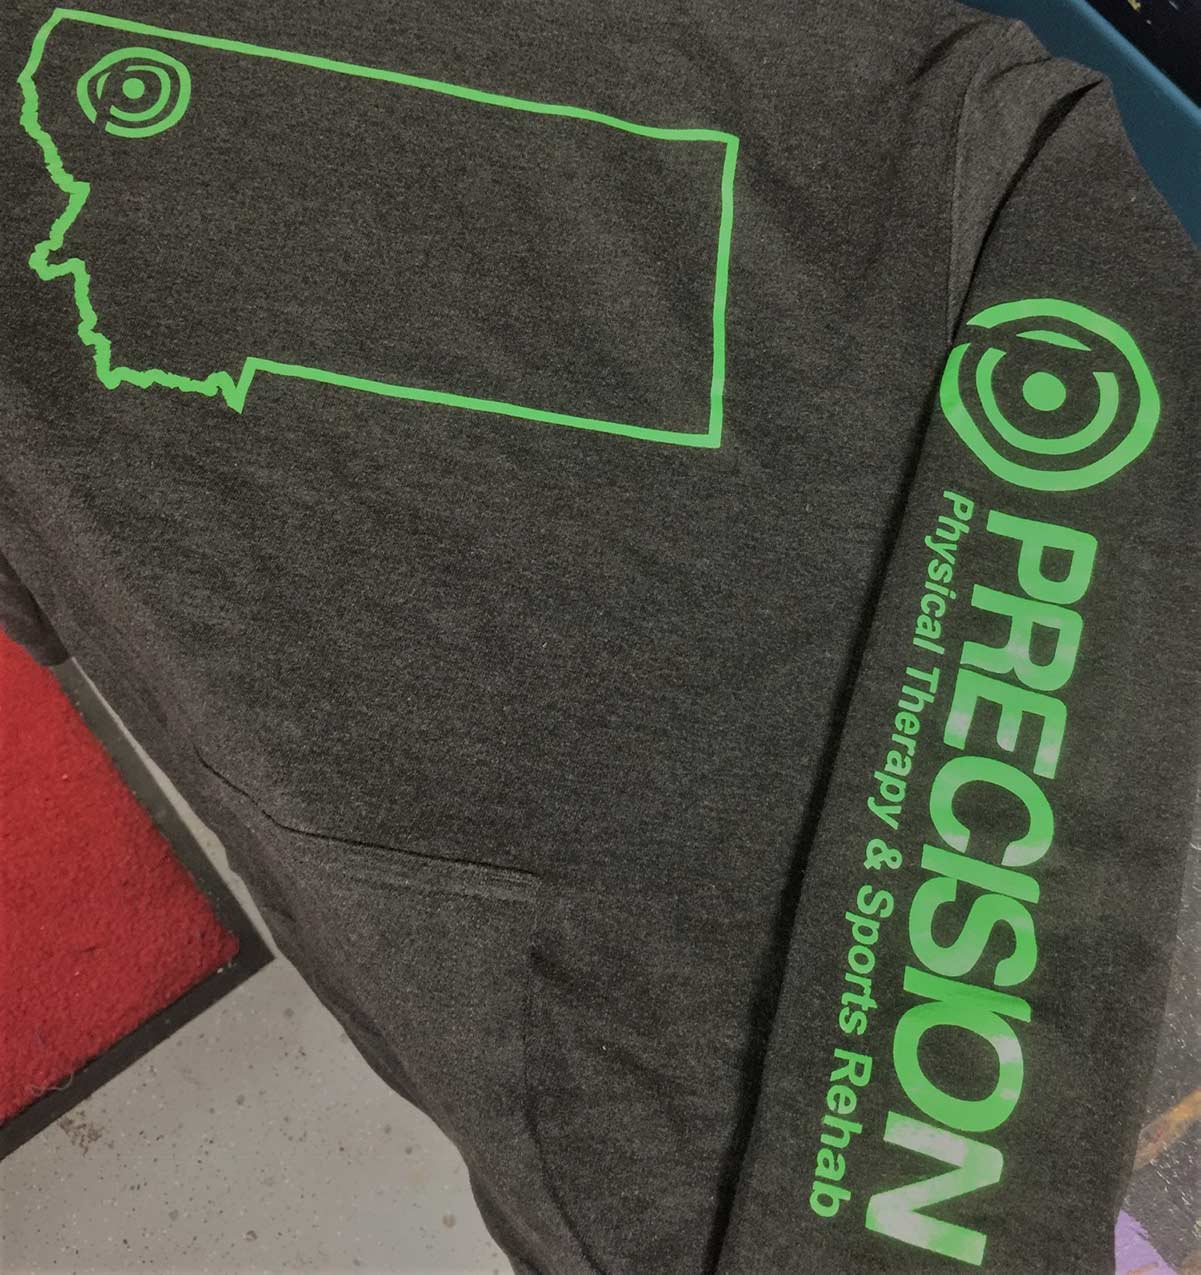 Precision Physical Therapy in Kalispell custom screen printed sweater